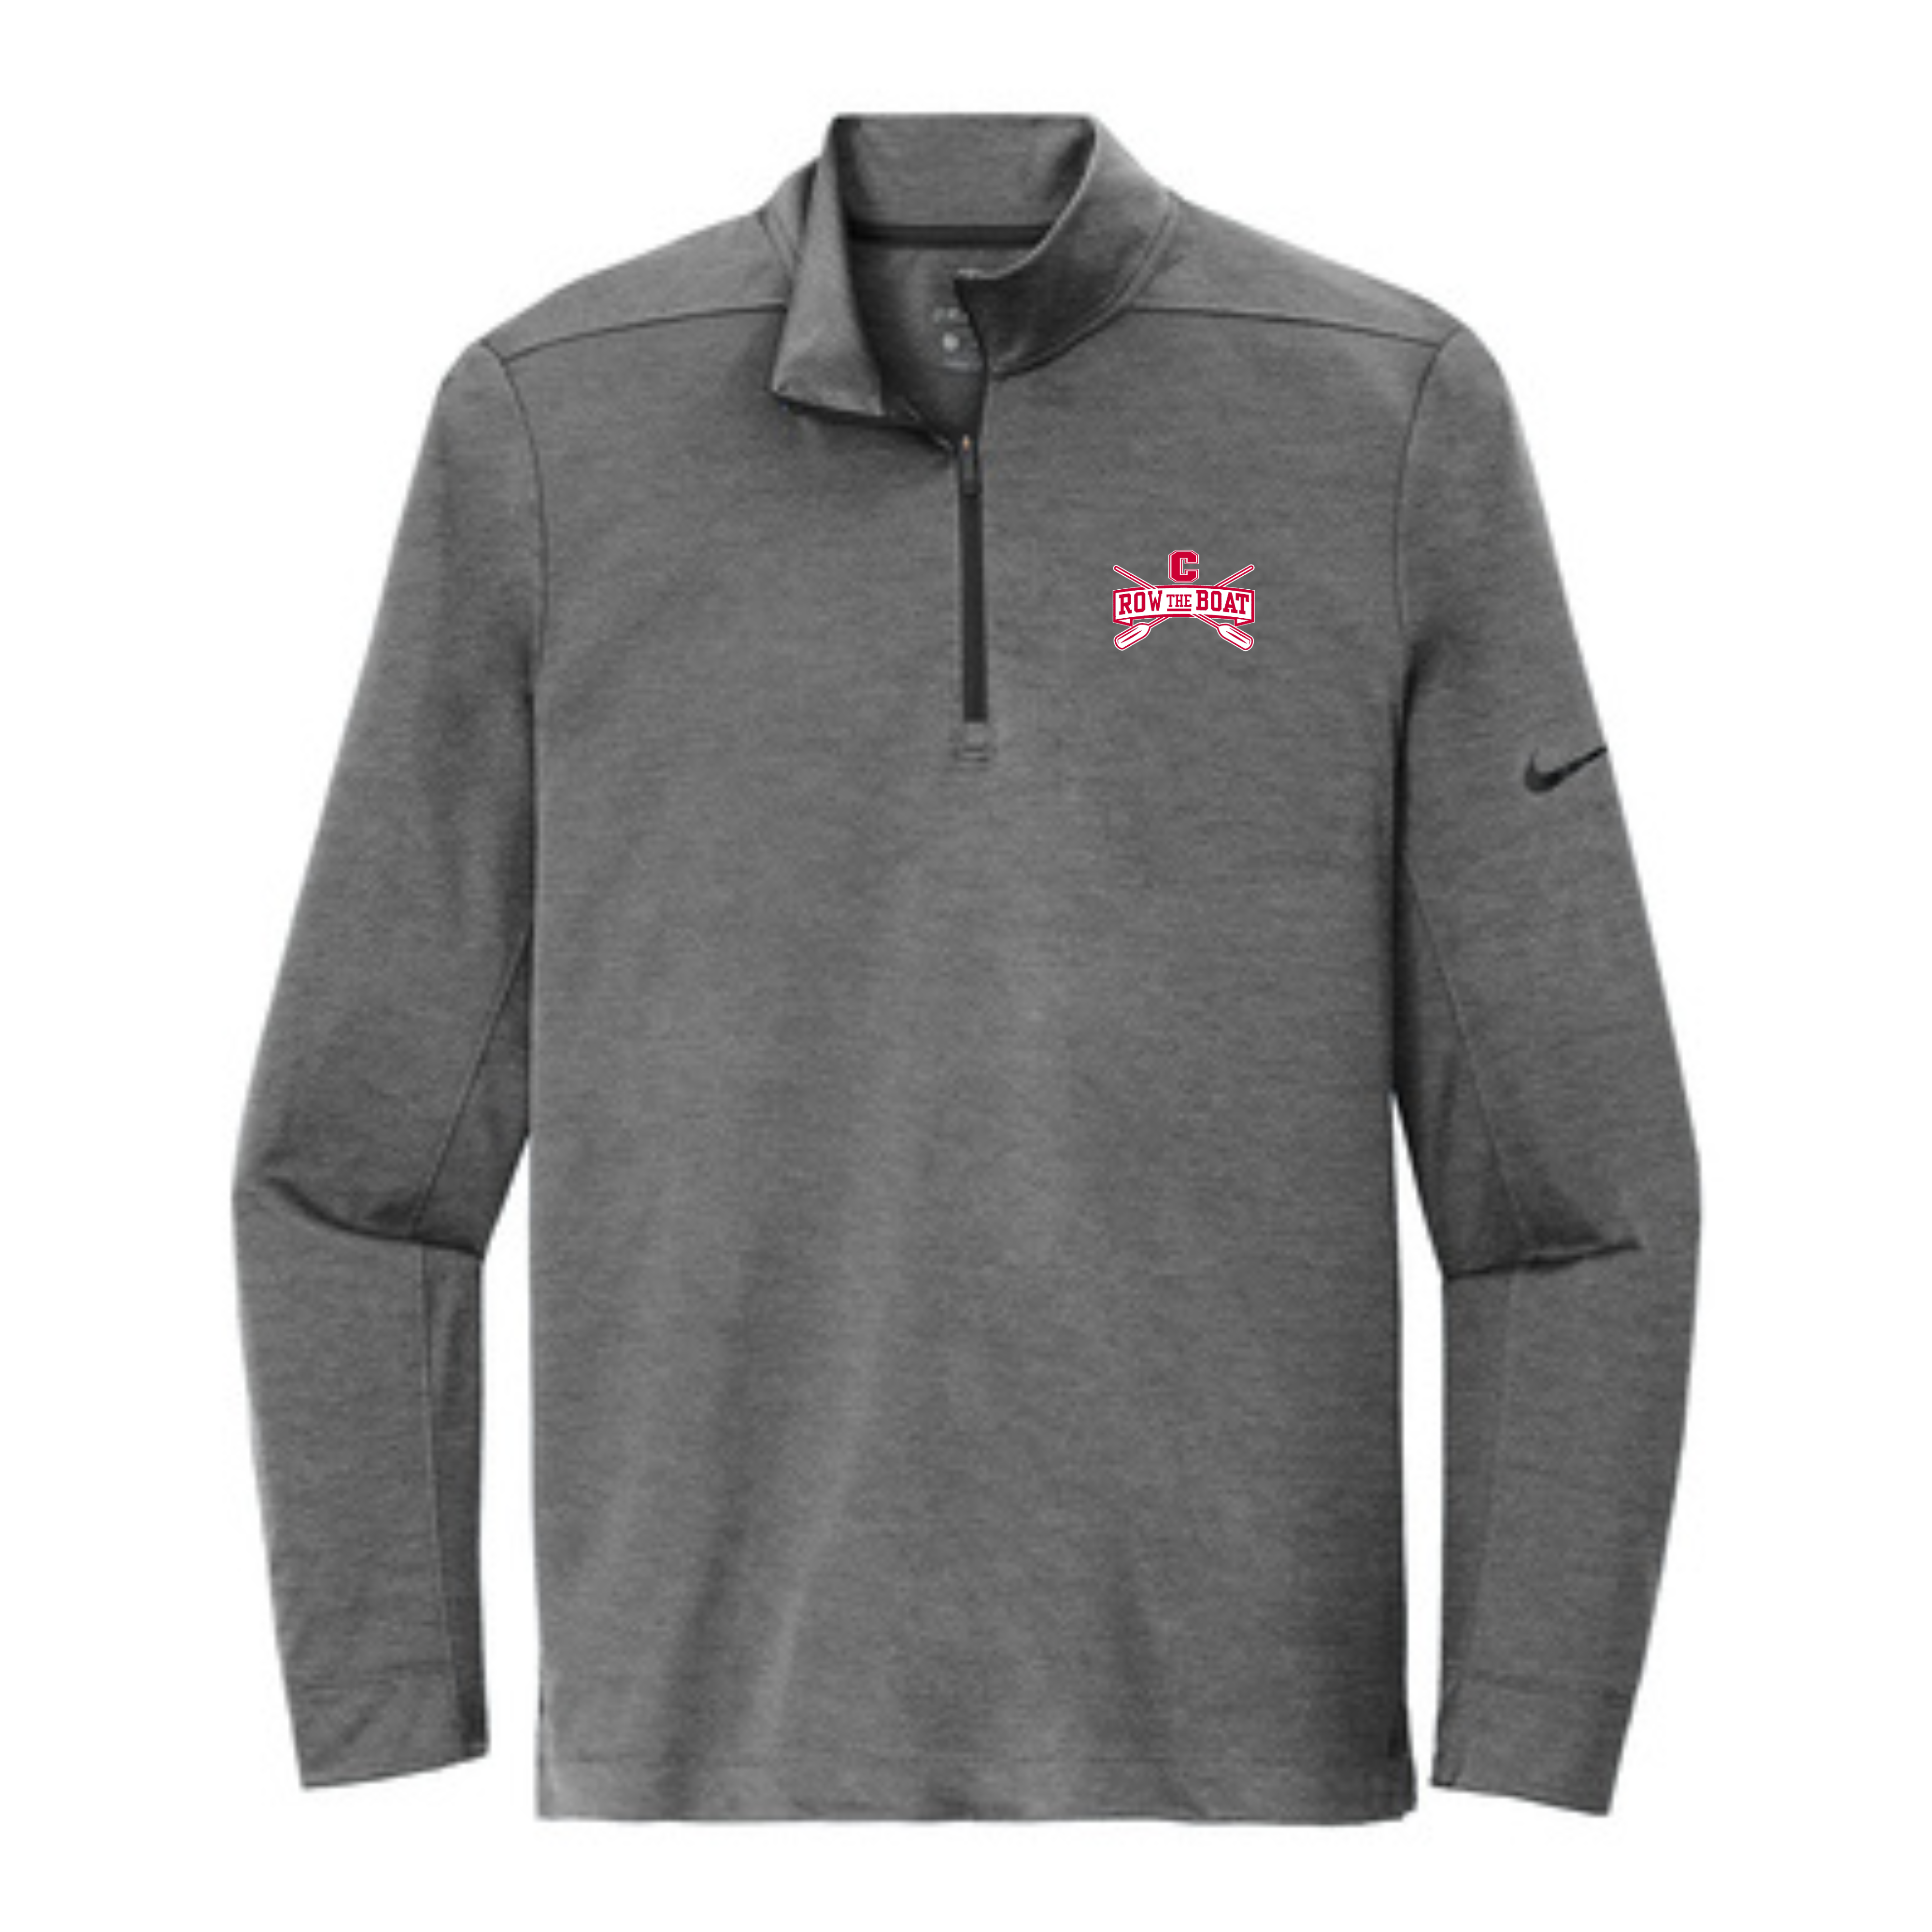 Central Row the Boat Men's Nike Pullover- NKBV6044